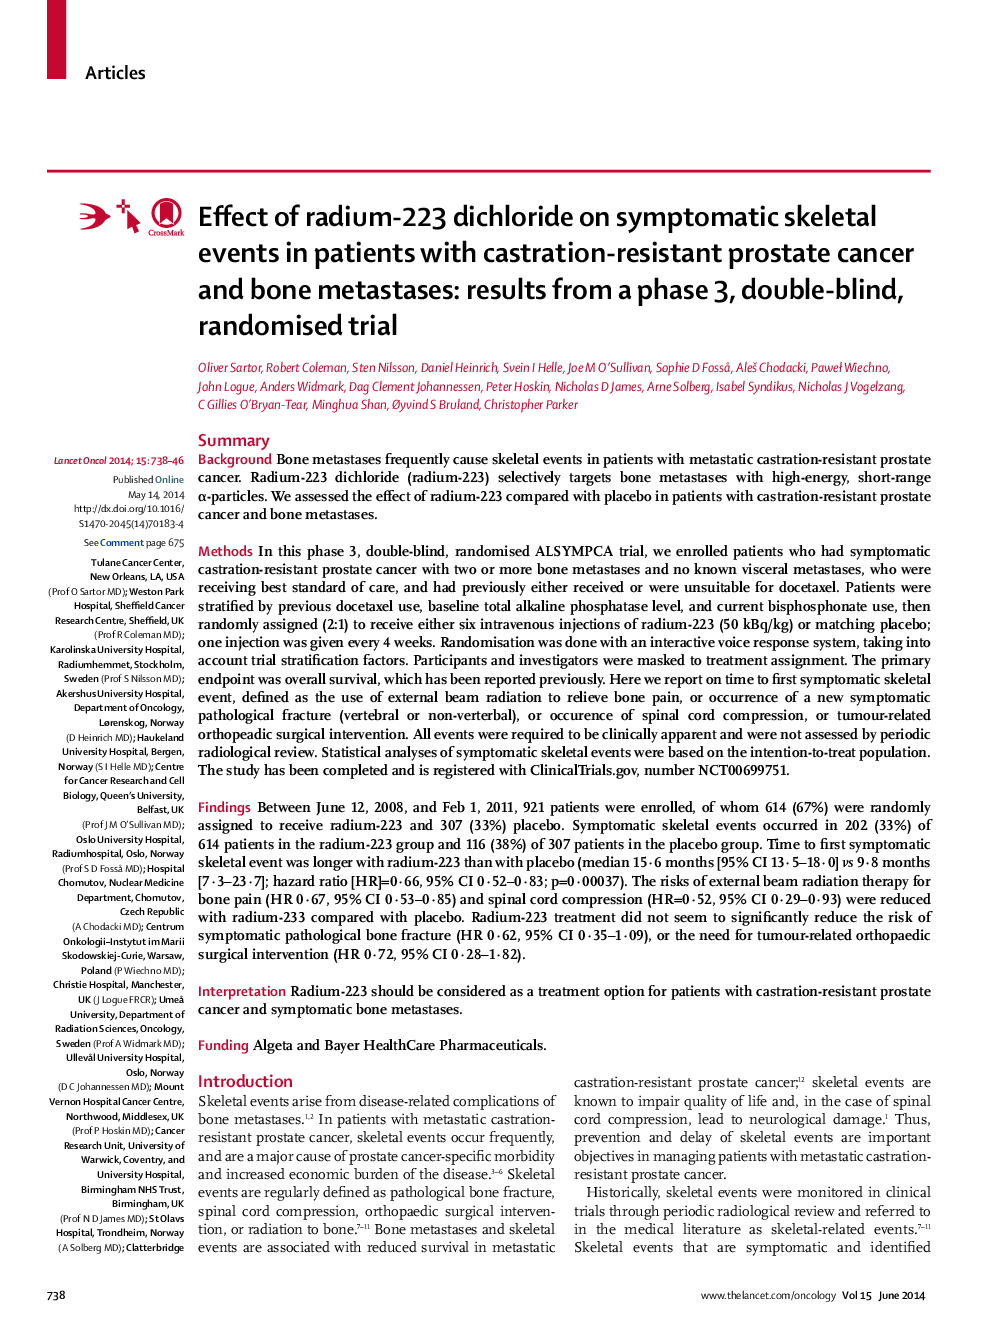 Effect of radium-223 dichloride on symptomatic skeletal events in patients with castration-resistant prostate cancer and bone metastases: results from a phase 3, double-blind, randomised trial